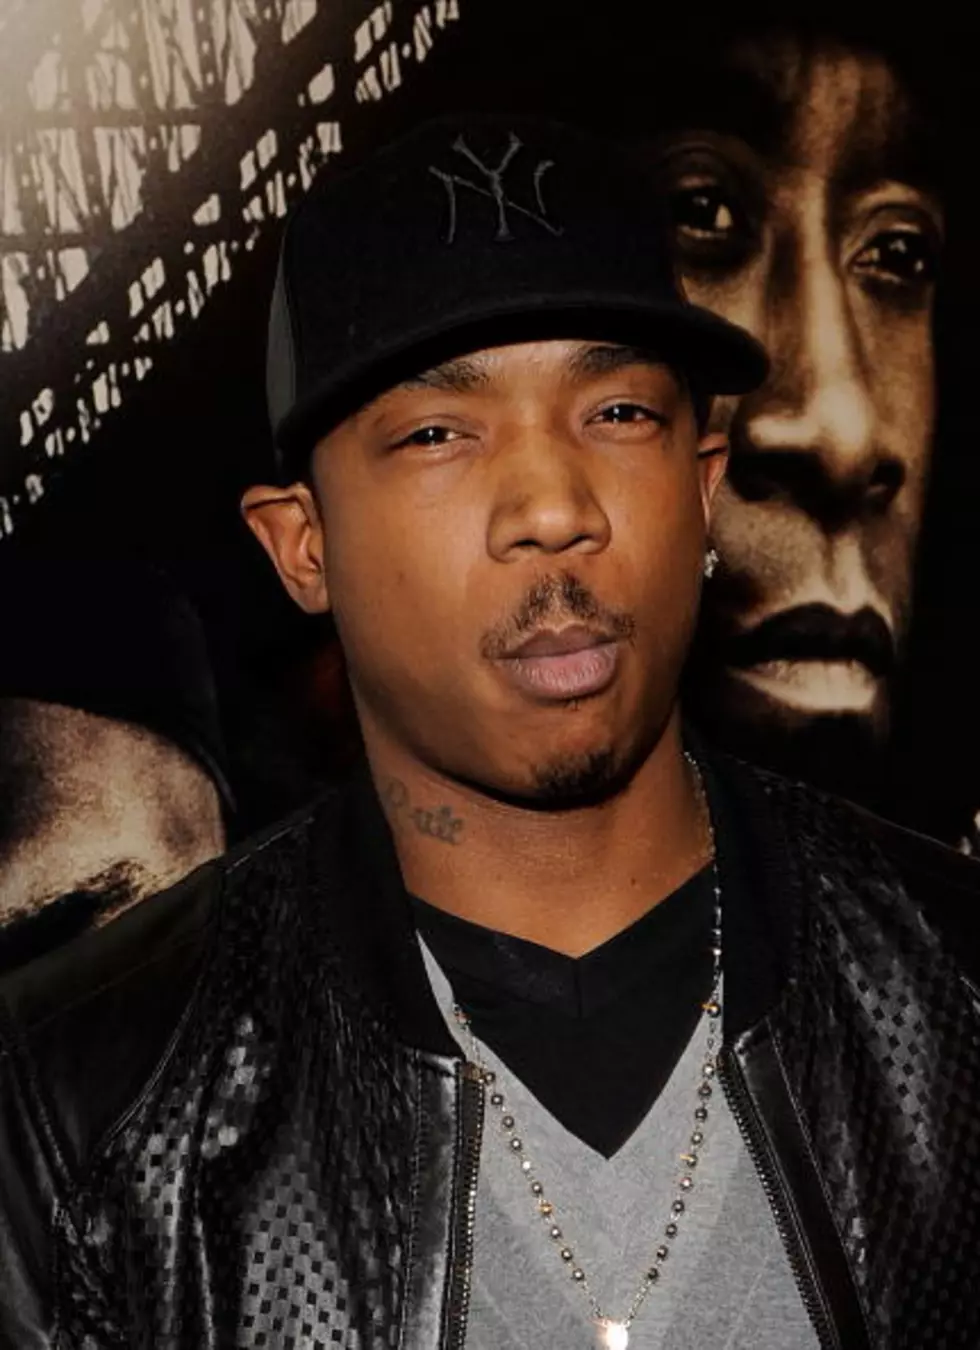 New Ja Rule LP Lands In Stores Day Before Rapper’s Prison Term